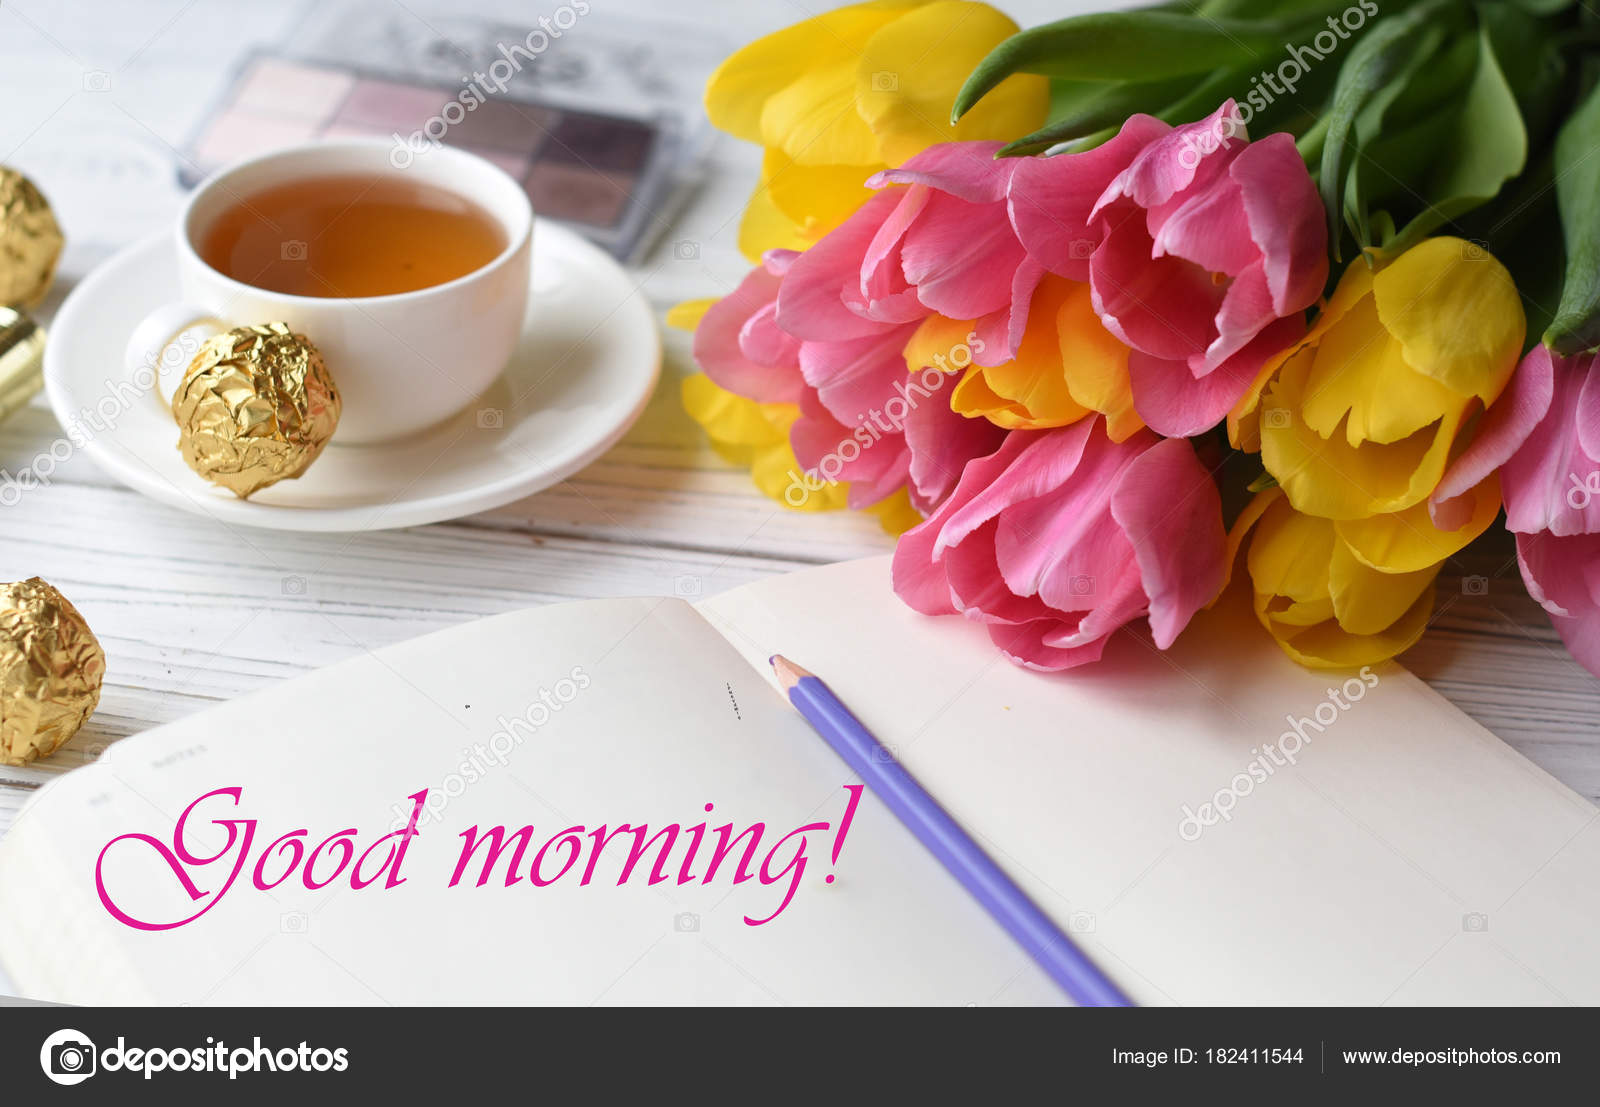 Greeting Card Good Morning Photo Tulips Cup Tea Note Book Stock ...